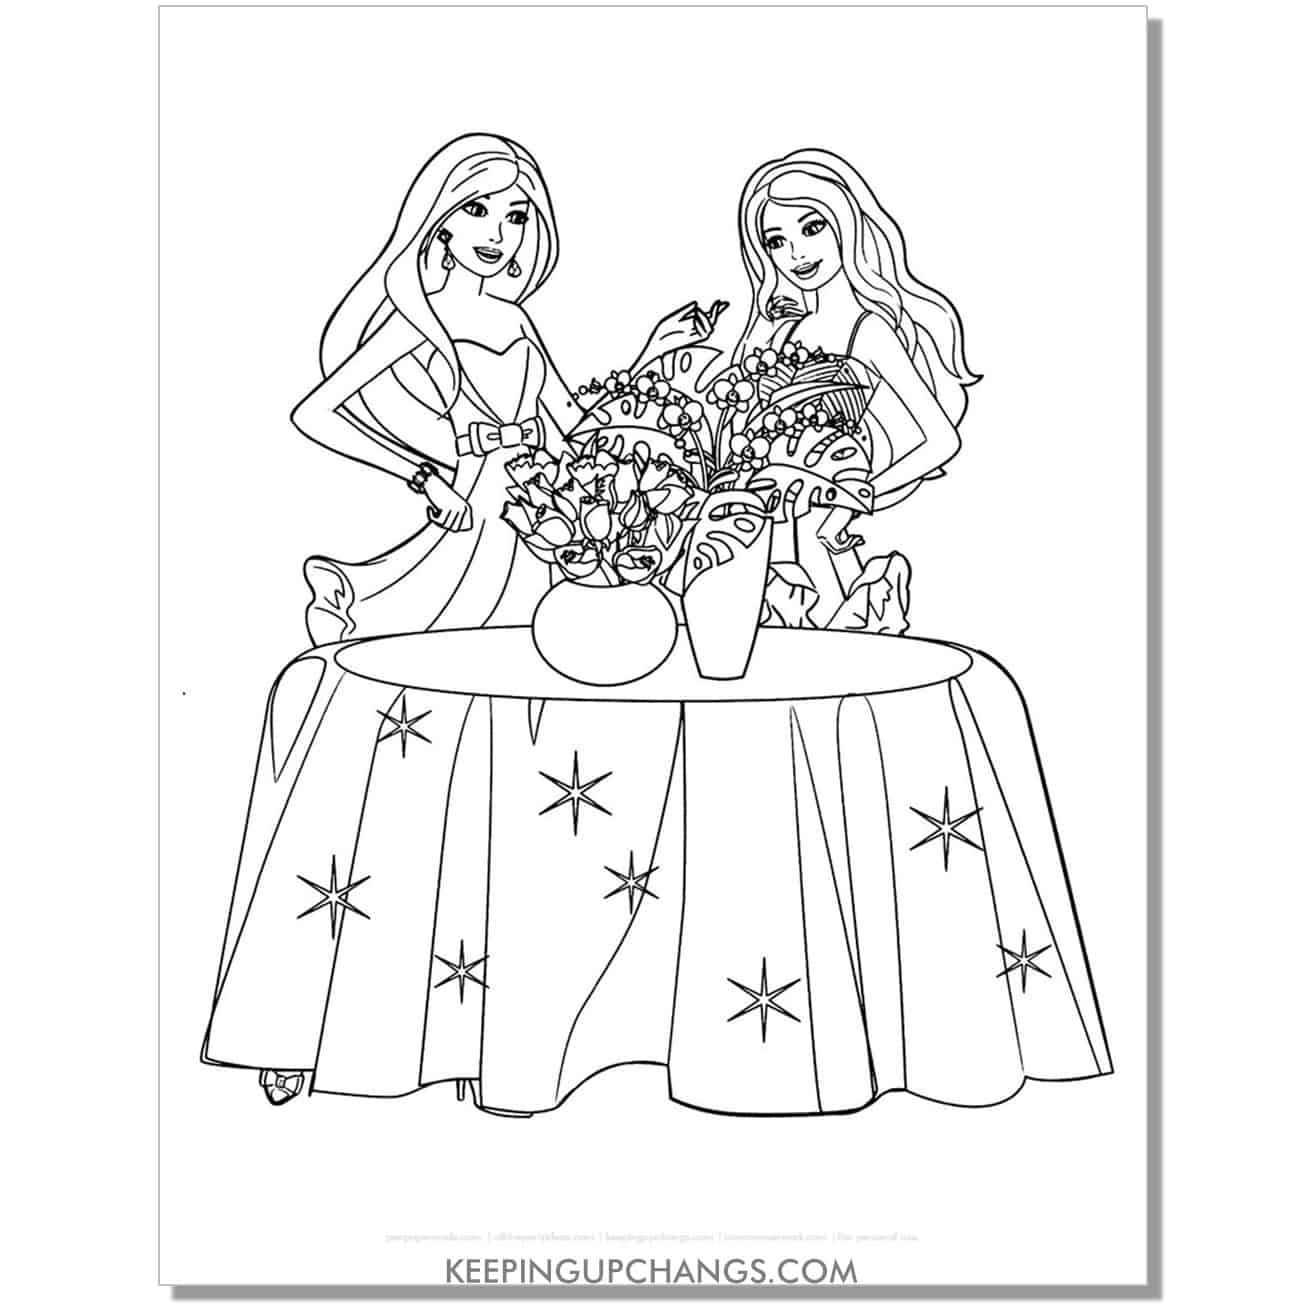 barbie with friend admiring floral centerpiece coloring page.